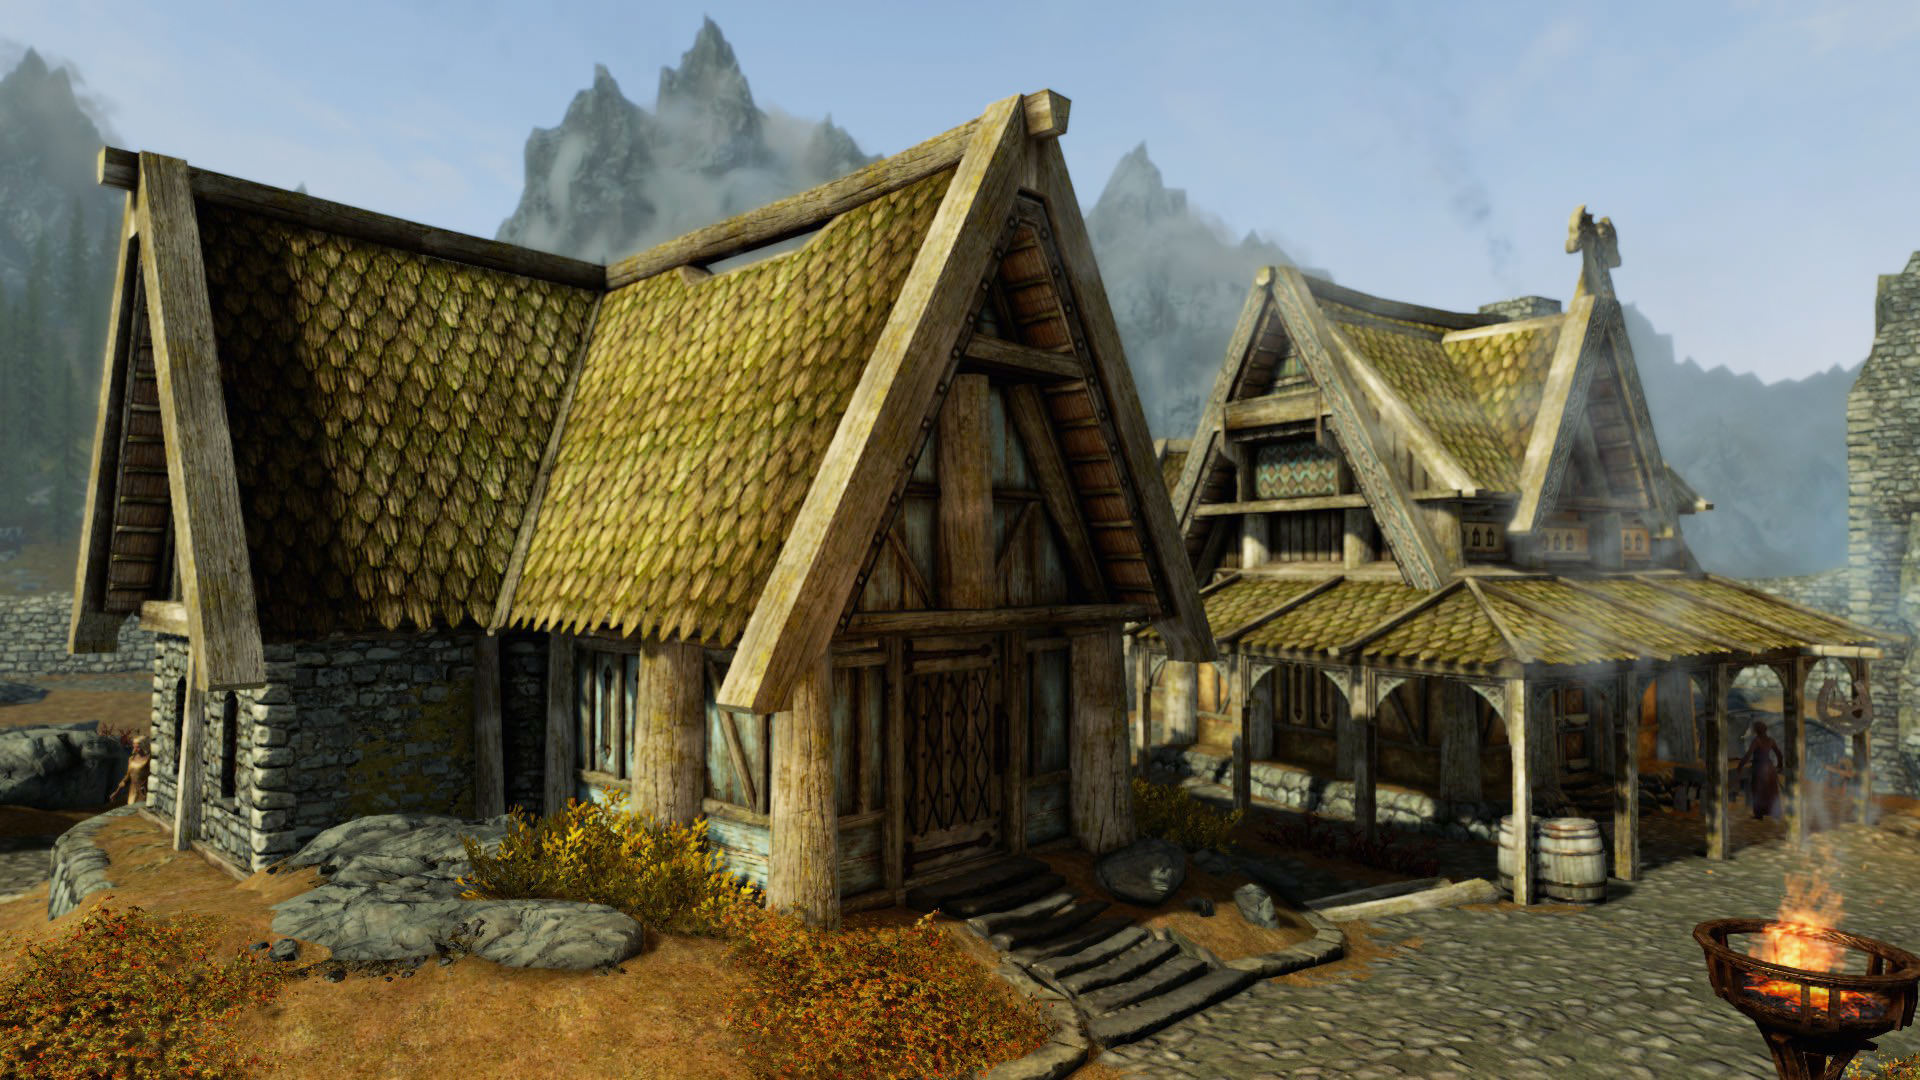 Skyrim Breezehome Pictures To Pin On Pinterest PinsDaddy.